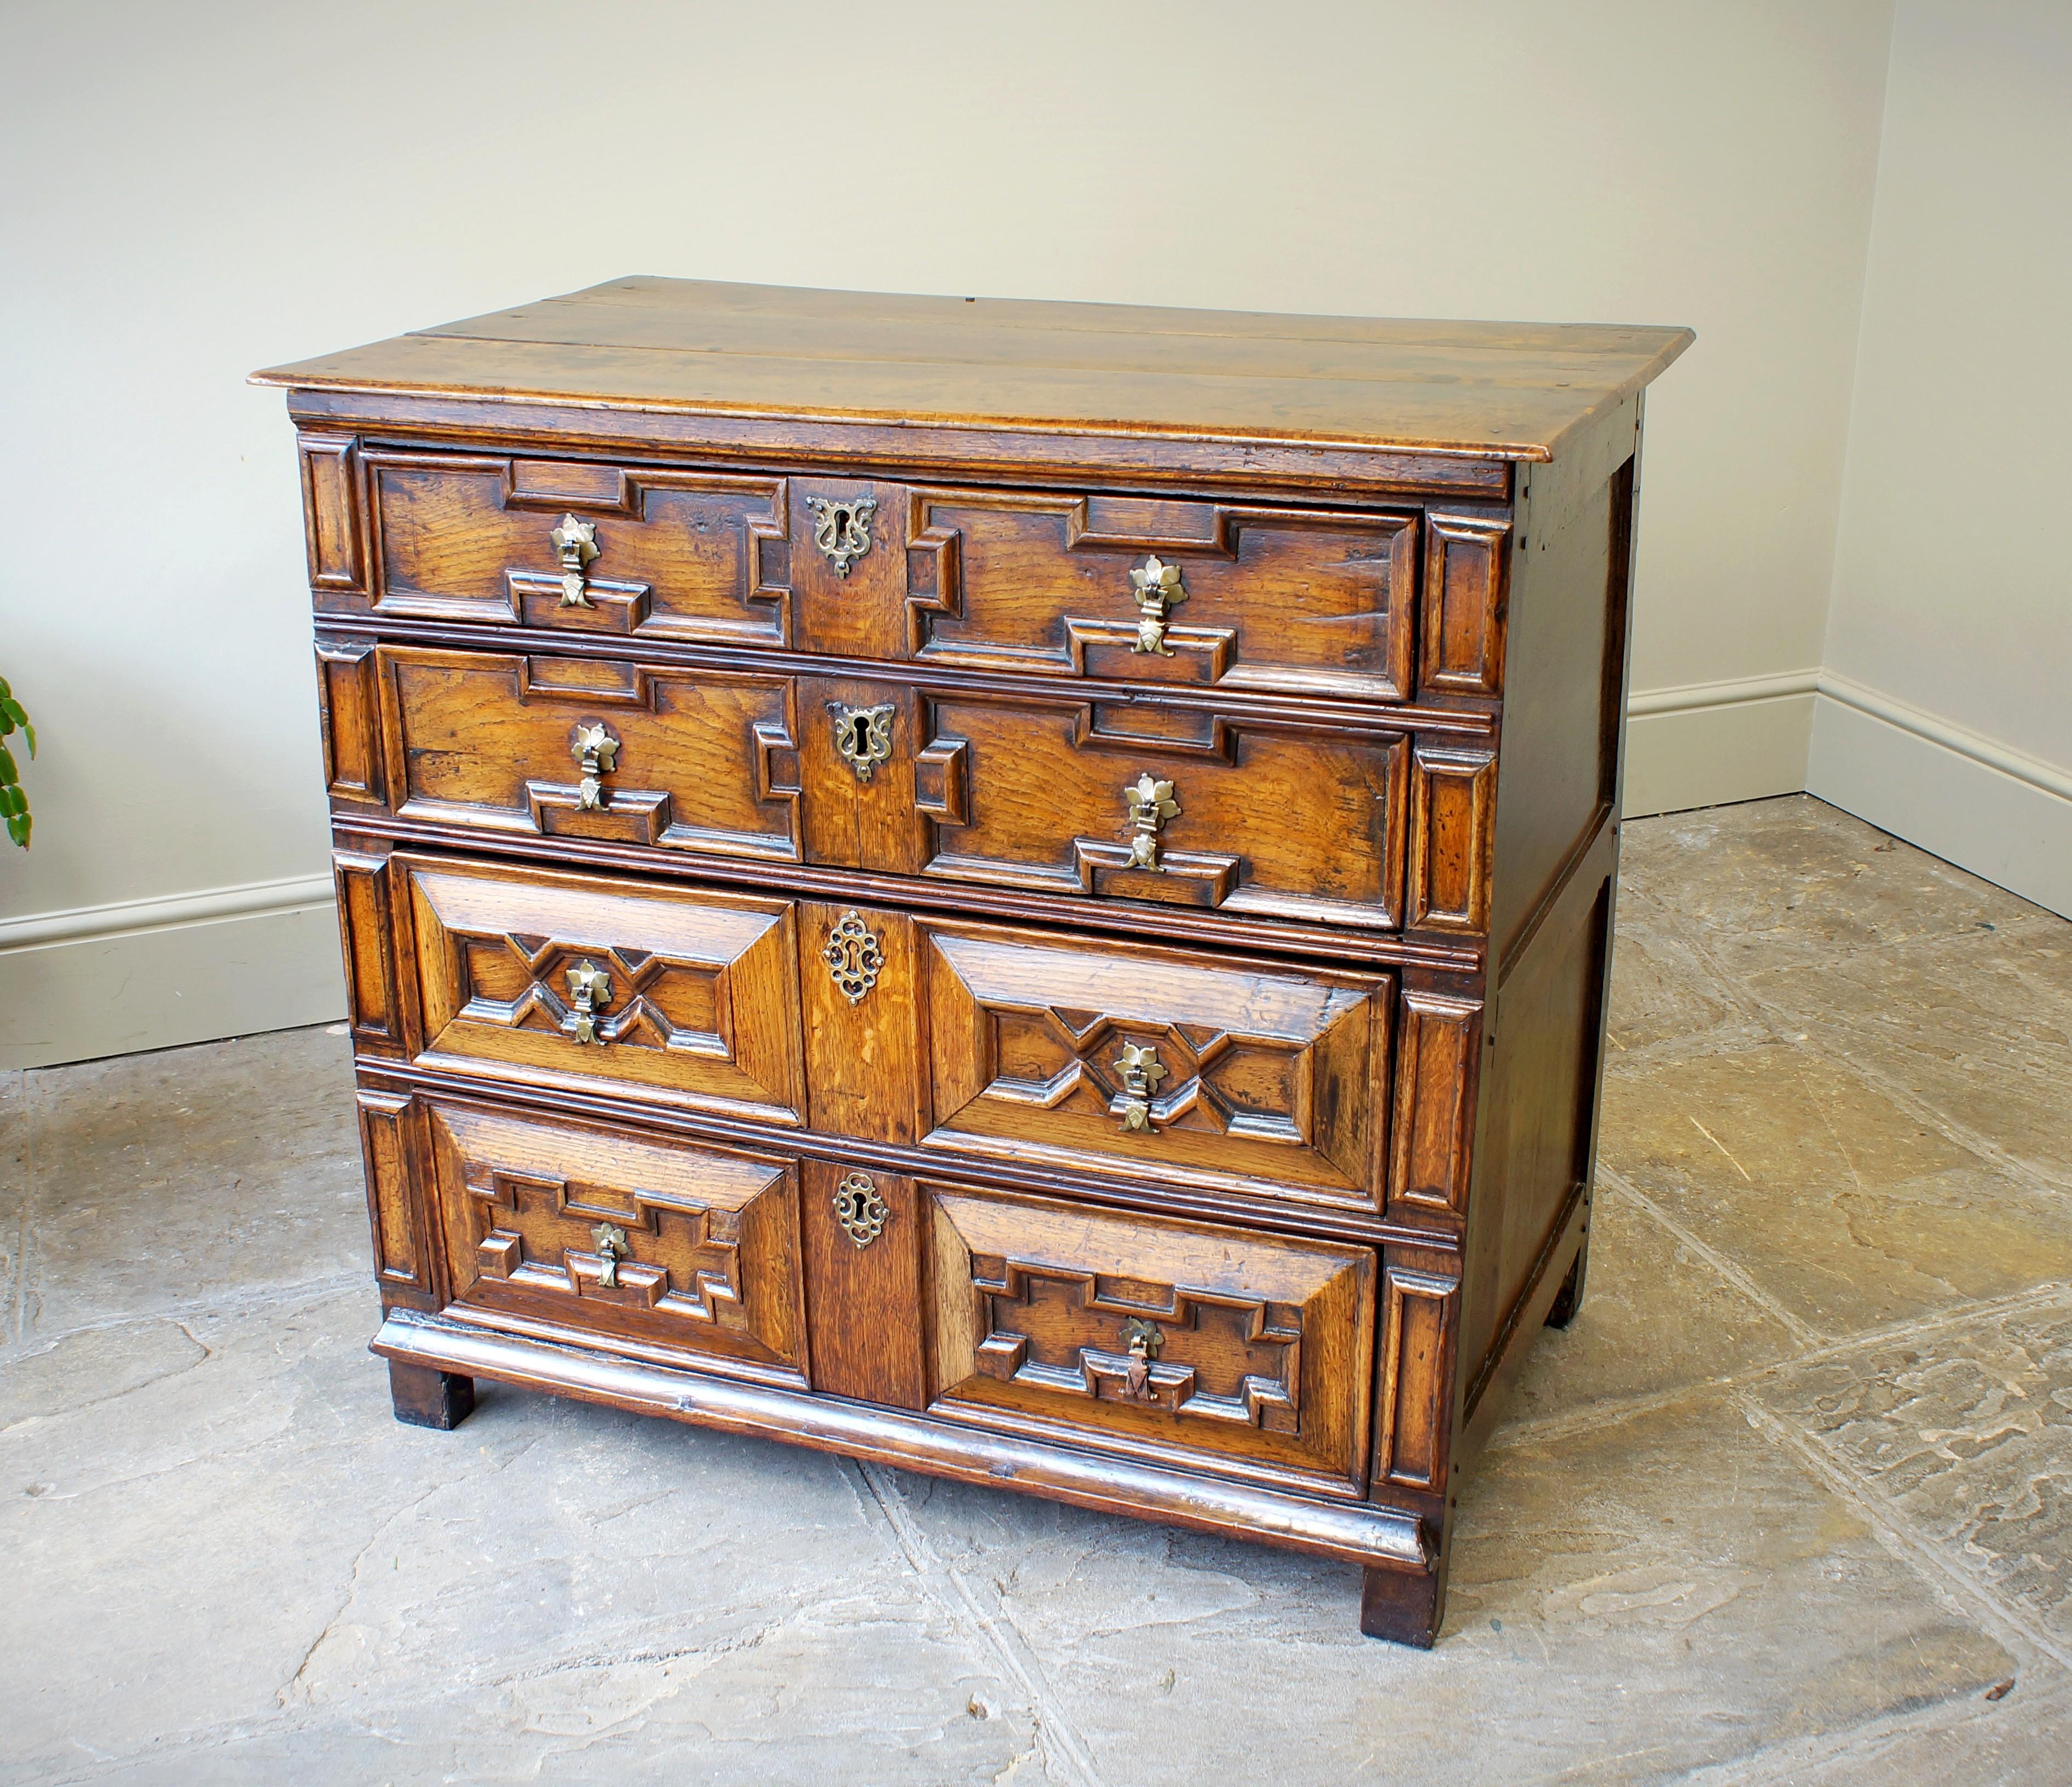 A very good 17th Century Cushion Moulded Chest Of Drawers, of small proportions and in excellent original condition. The drawer linings are constructed of elm and are hung on side runners. The chest retains most of its original brassware and has a